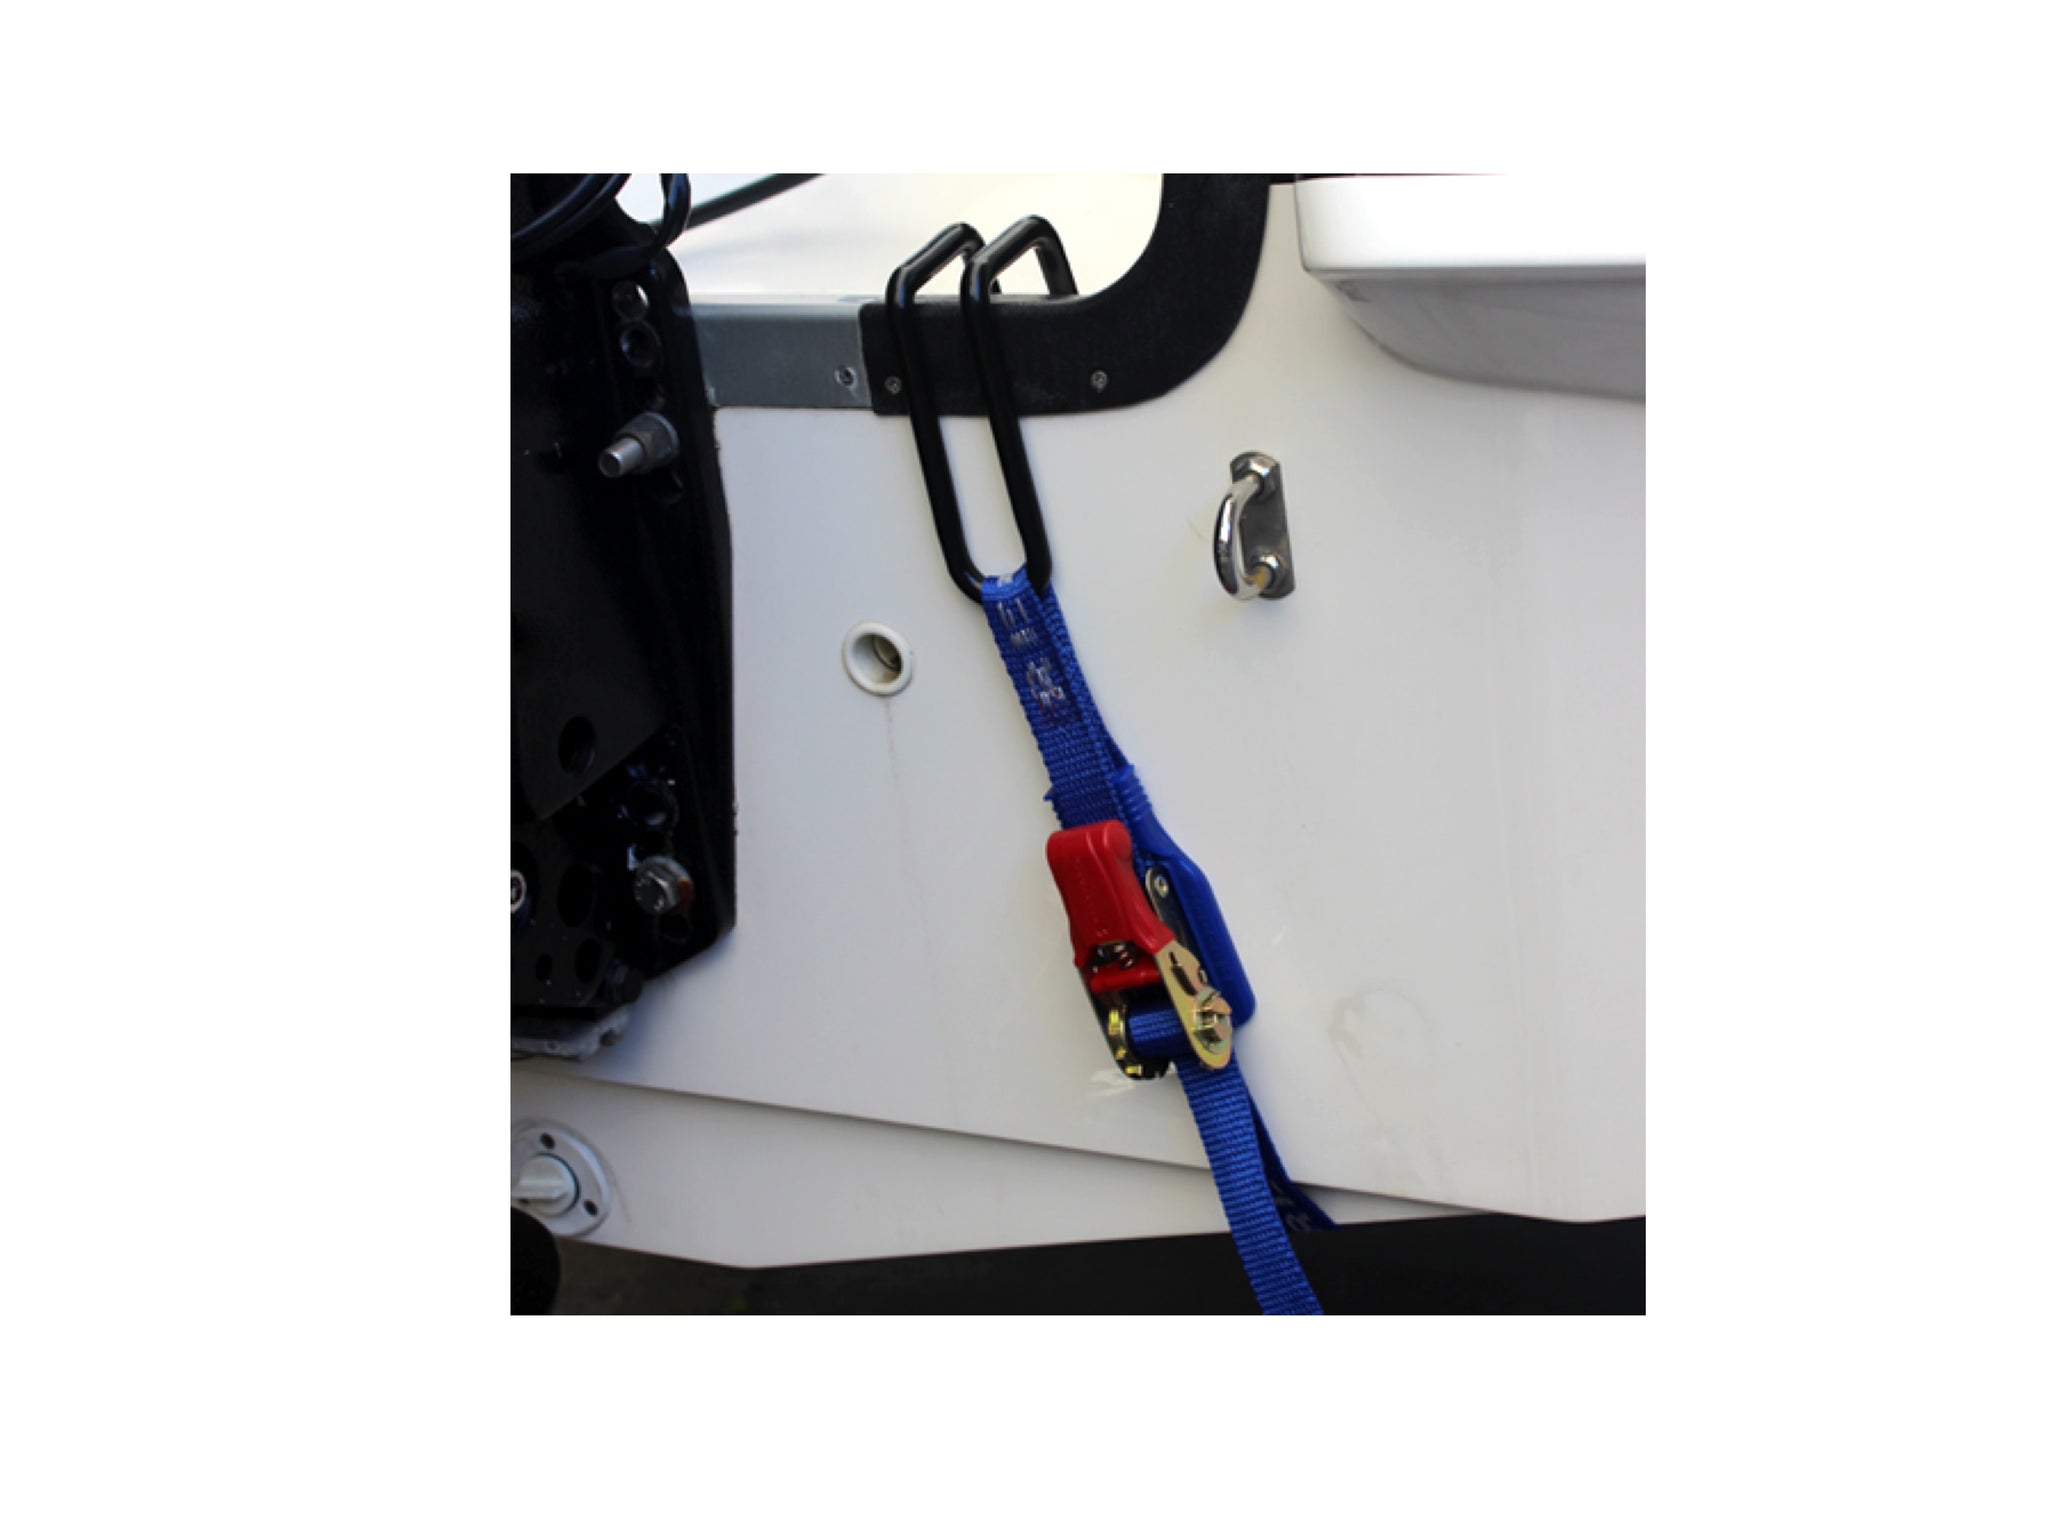 Transom Ratchet Tiedown, Transom hook - The Cover Shop